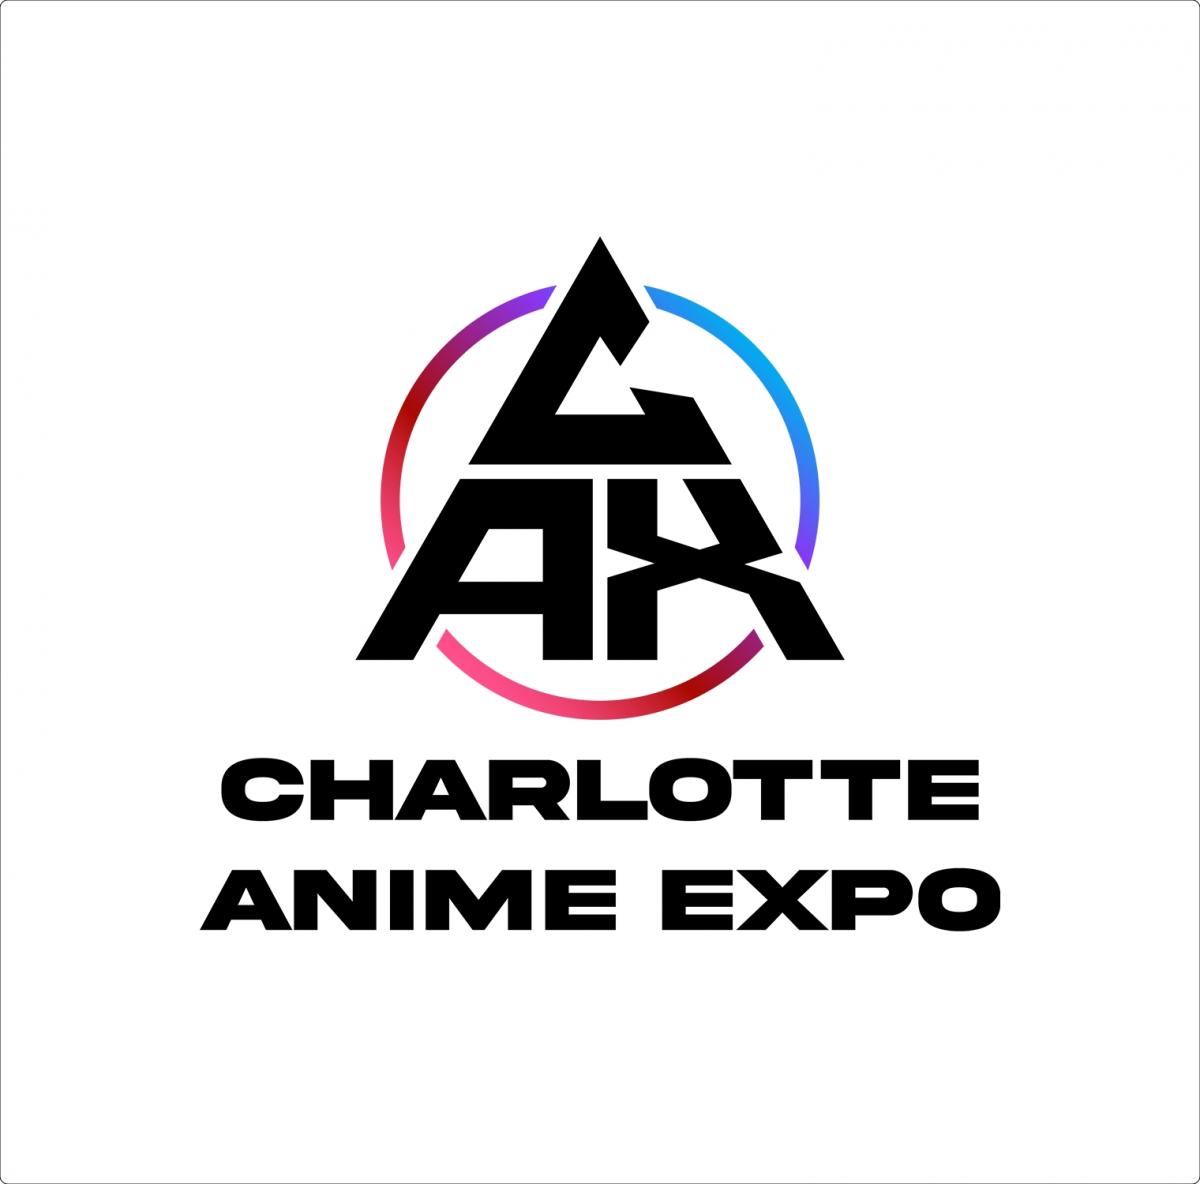 Crunchyroll is Bringing the Ultimate Anime Experience to the Biggest Evo  Ever